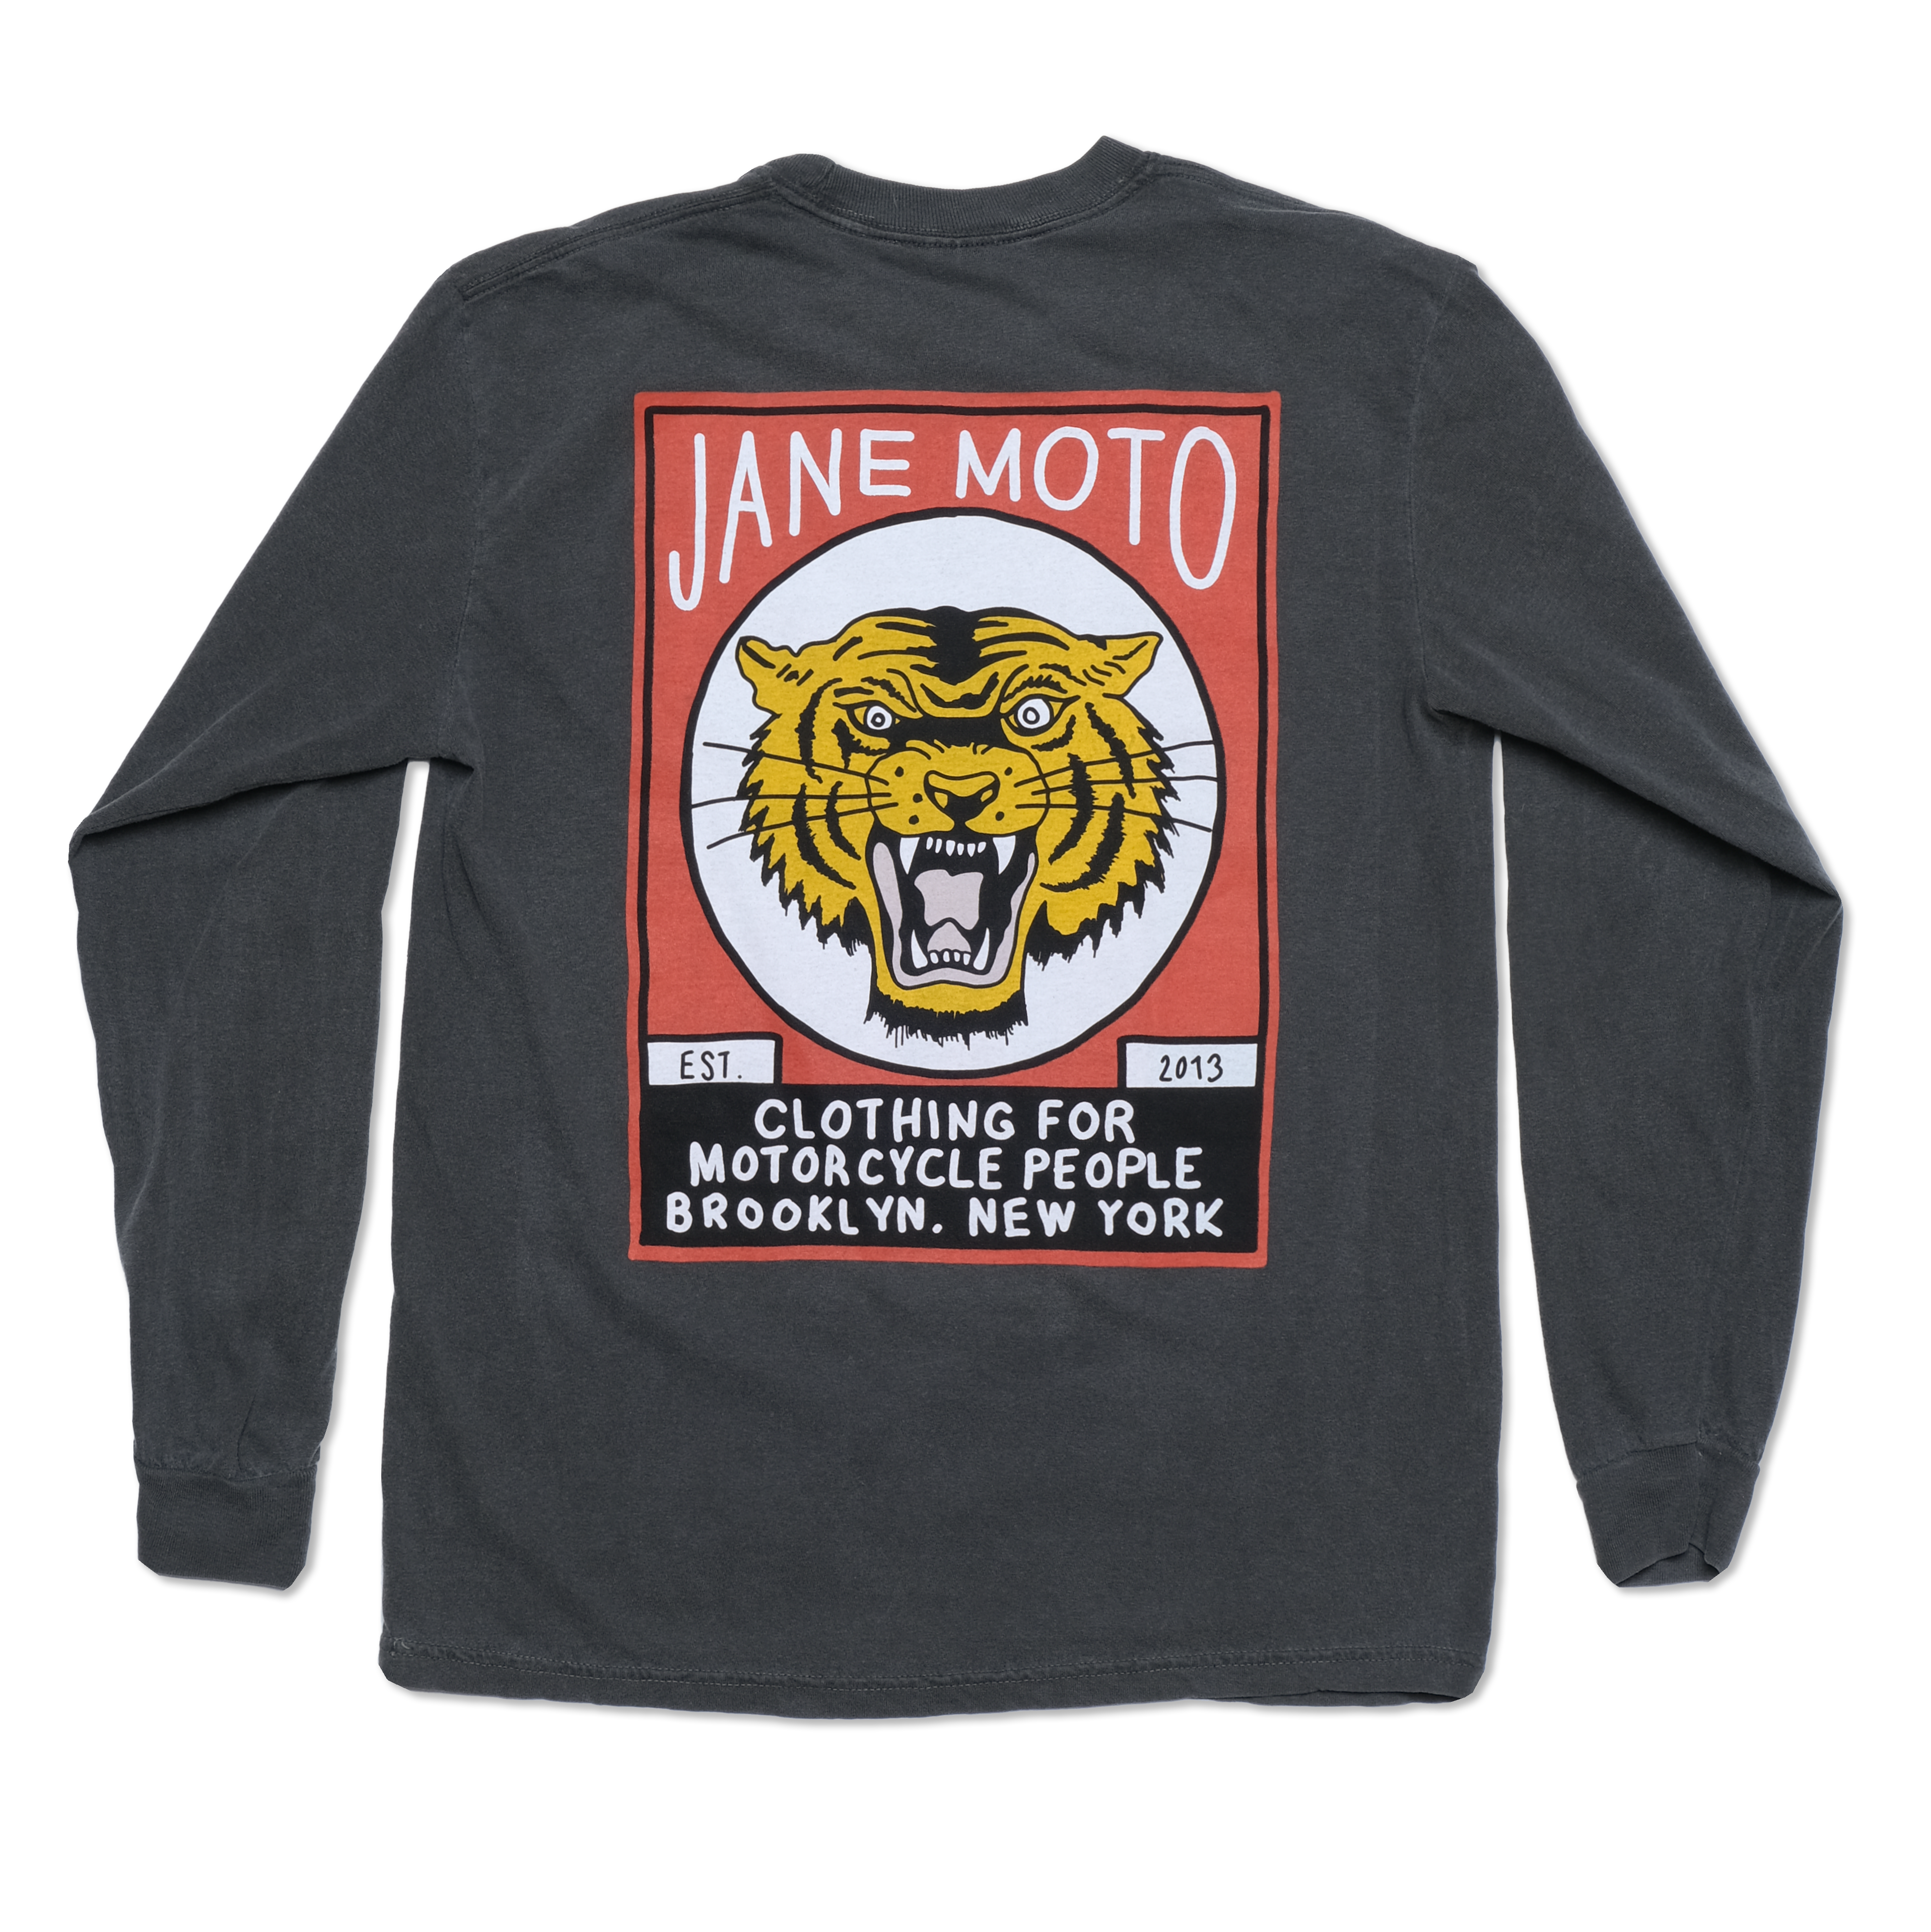 LUDLOW TIGER COLOR LONG SLEEVE T-SHIRT - GARMENT DYED - GREY